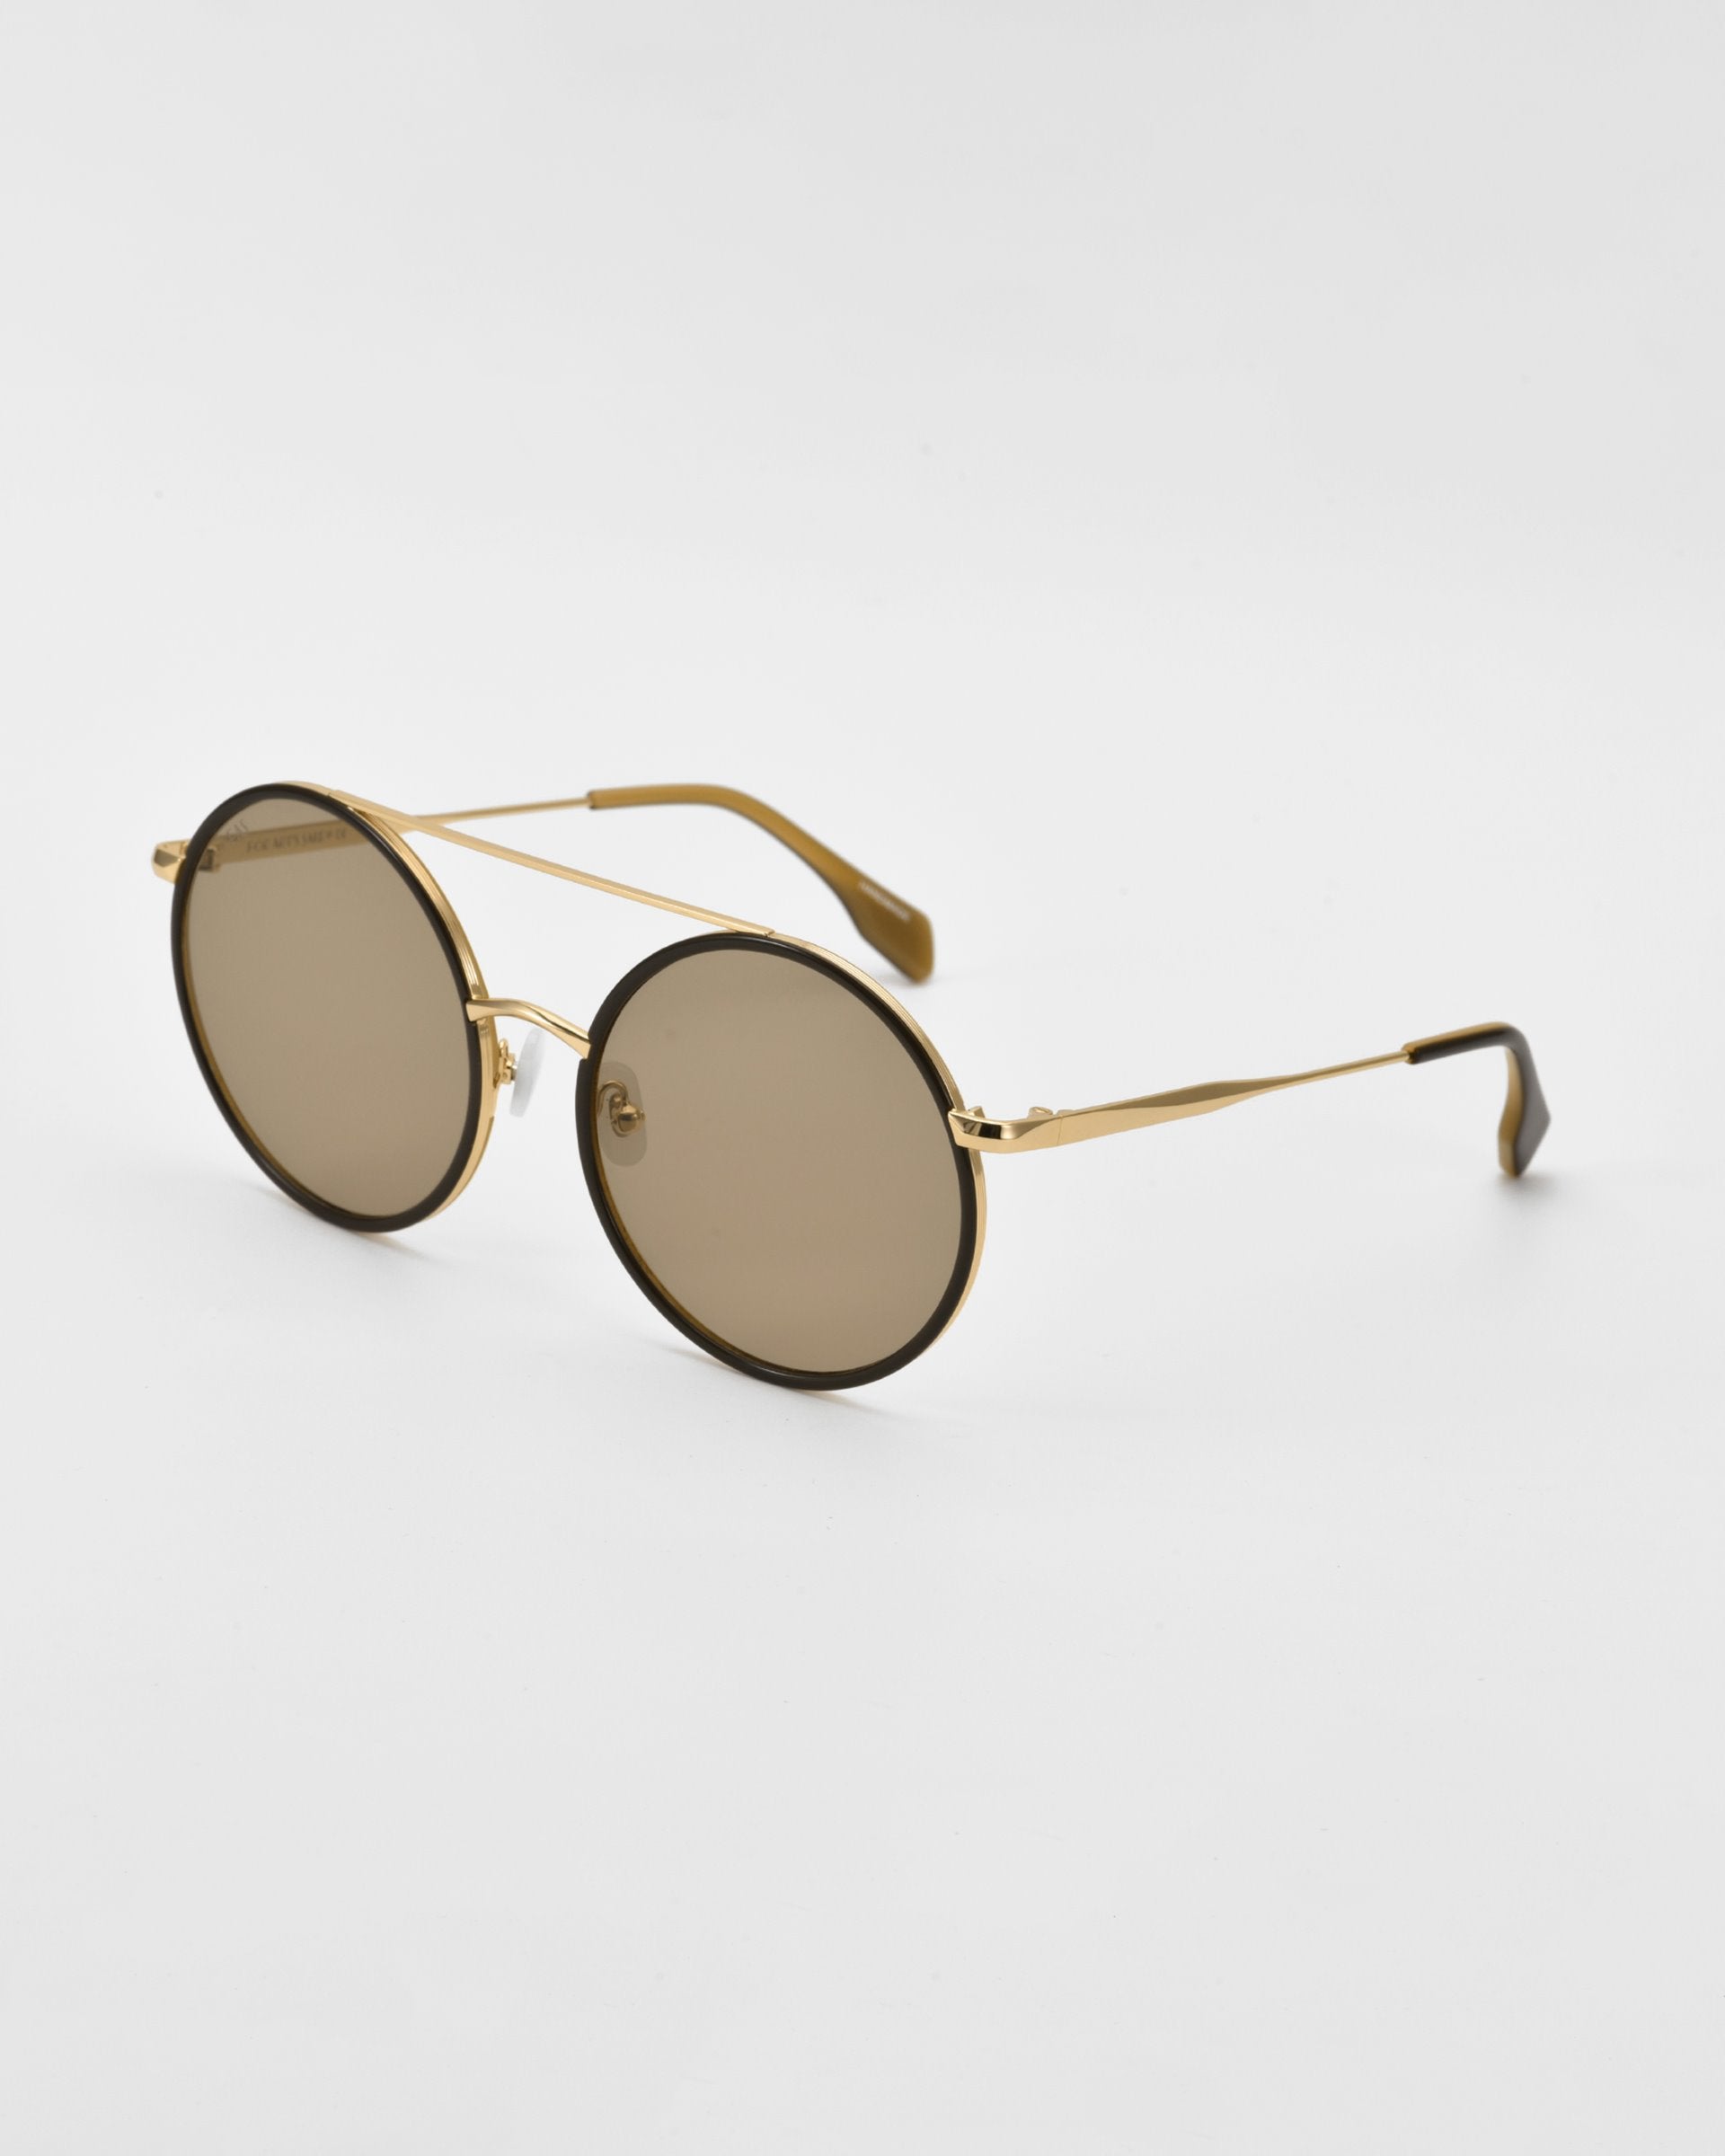 A pair of oversized round aviator sunglasses with gold and silver-tone metal frames and brown lenses. The Orb by For Art&#39;s Sake®, featuring jade-stone nose pads, are placed on a plain white surface, facing slightly to the left with their thin arms extended.